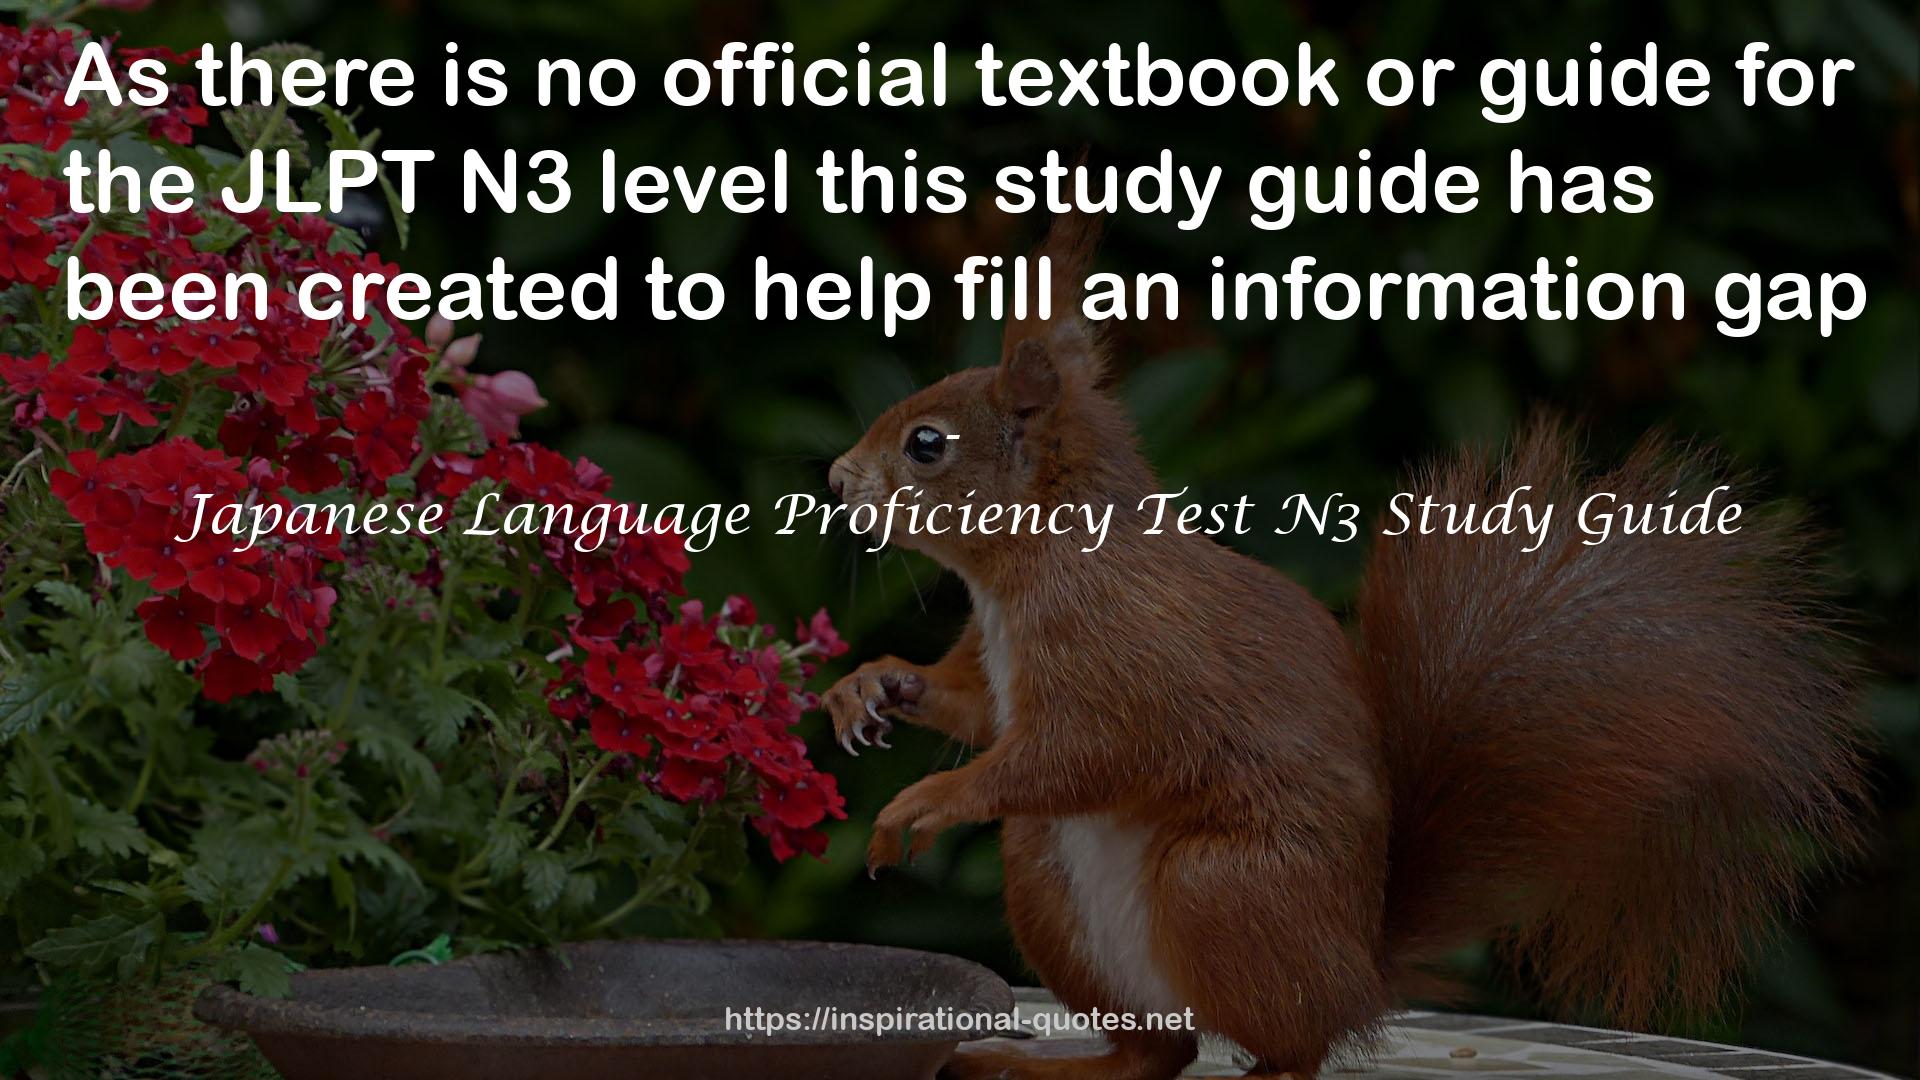 Japanese Language Proficiency Test N3 Study Guide QUOTES